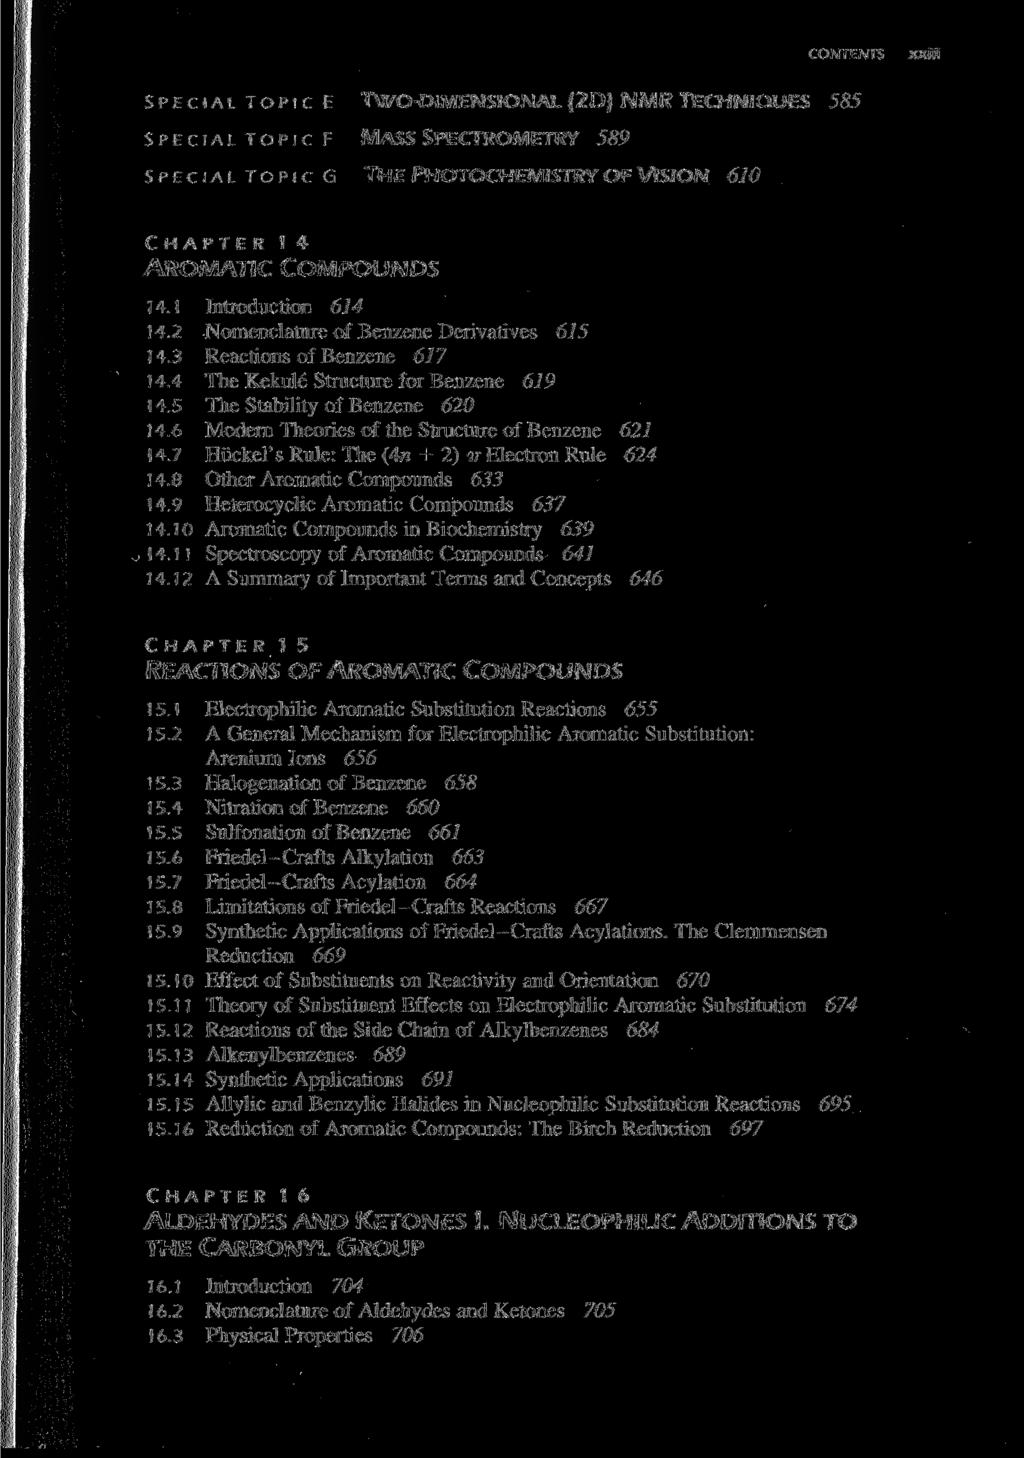 CONTENTS XXÜi SPECIAL TOPic E TWO-DIMENSIONAL (2D) NMR TECHNIQUES 585 SPECIAL TOPIC F MASS SPECTROMETRY 589 SPECIAL TOPIC G THE PHOTOCHEMISTRY OF VISION 610 CHAPTER 14 AROMATIC COMPOUNDS 14.